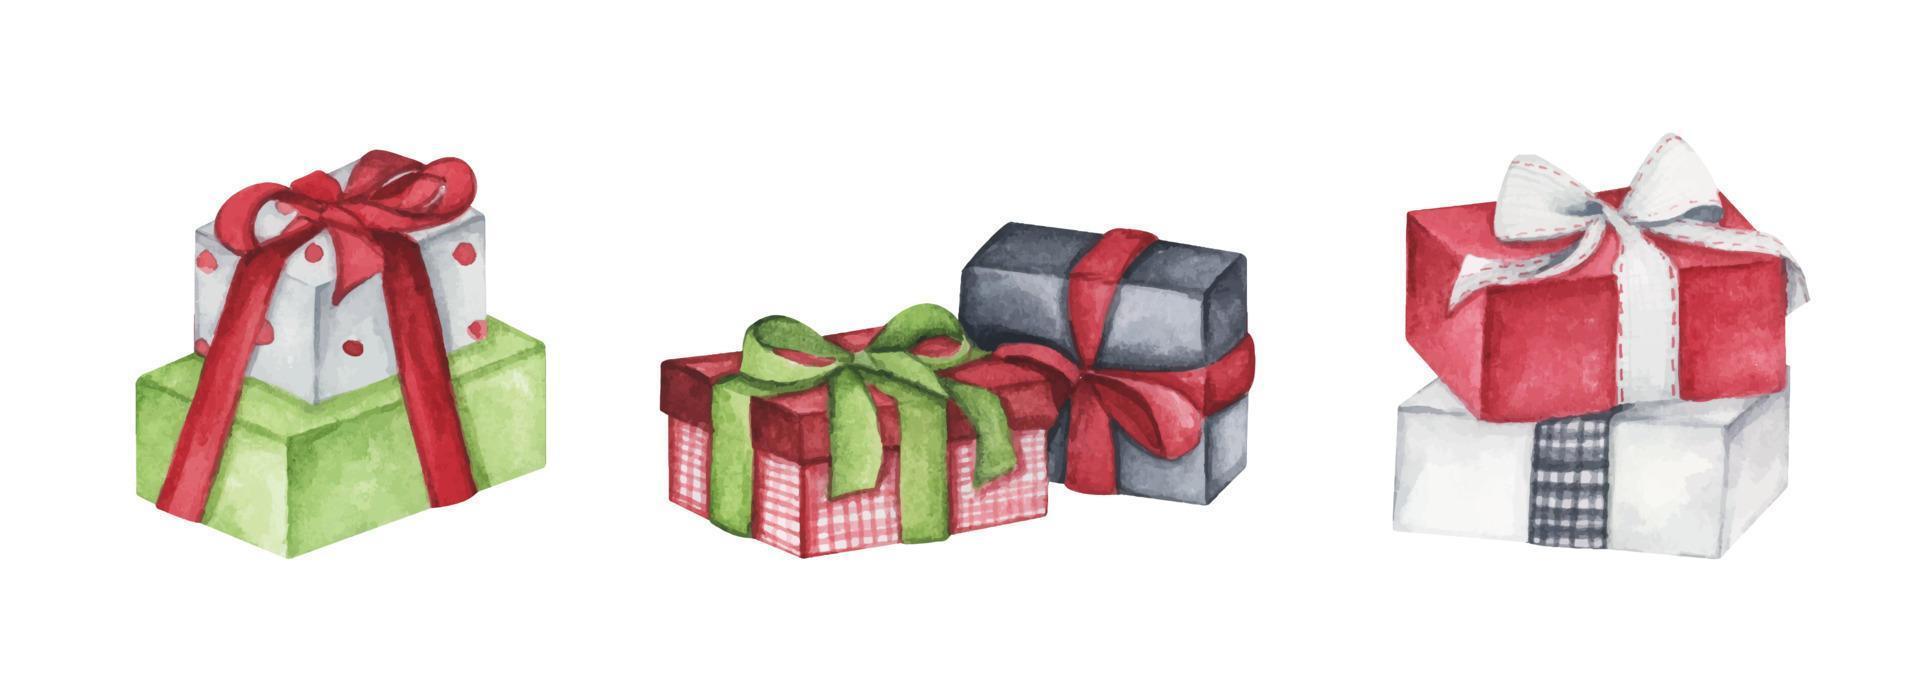 Christmas gift boxes with bows, Present box set. For design, print or background. Watercolor illustration. vector